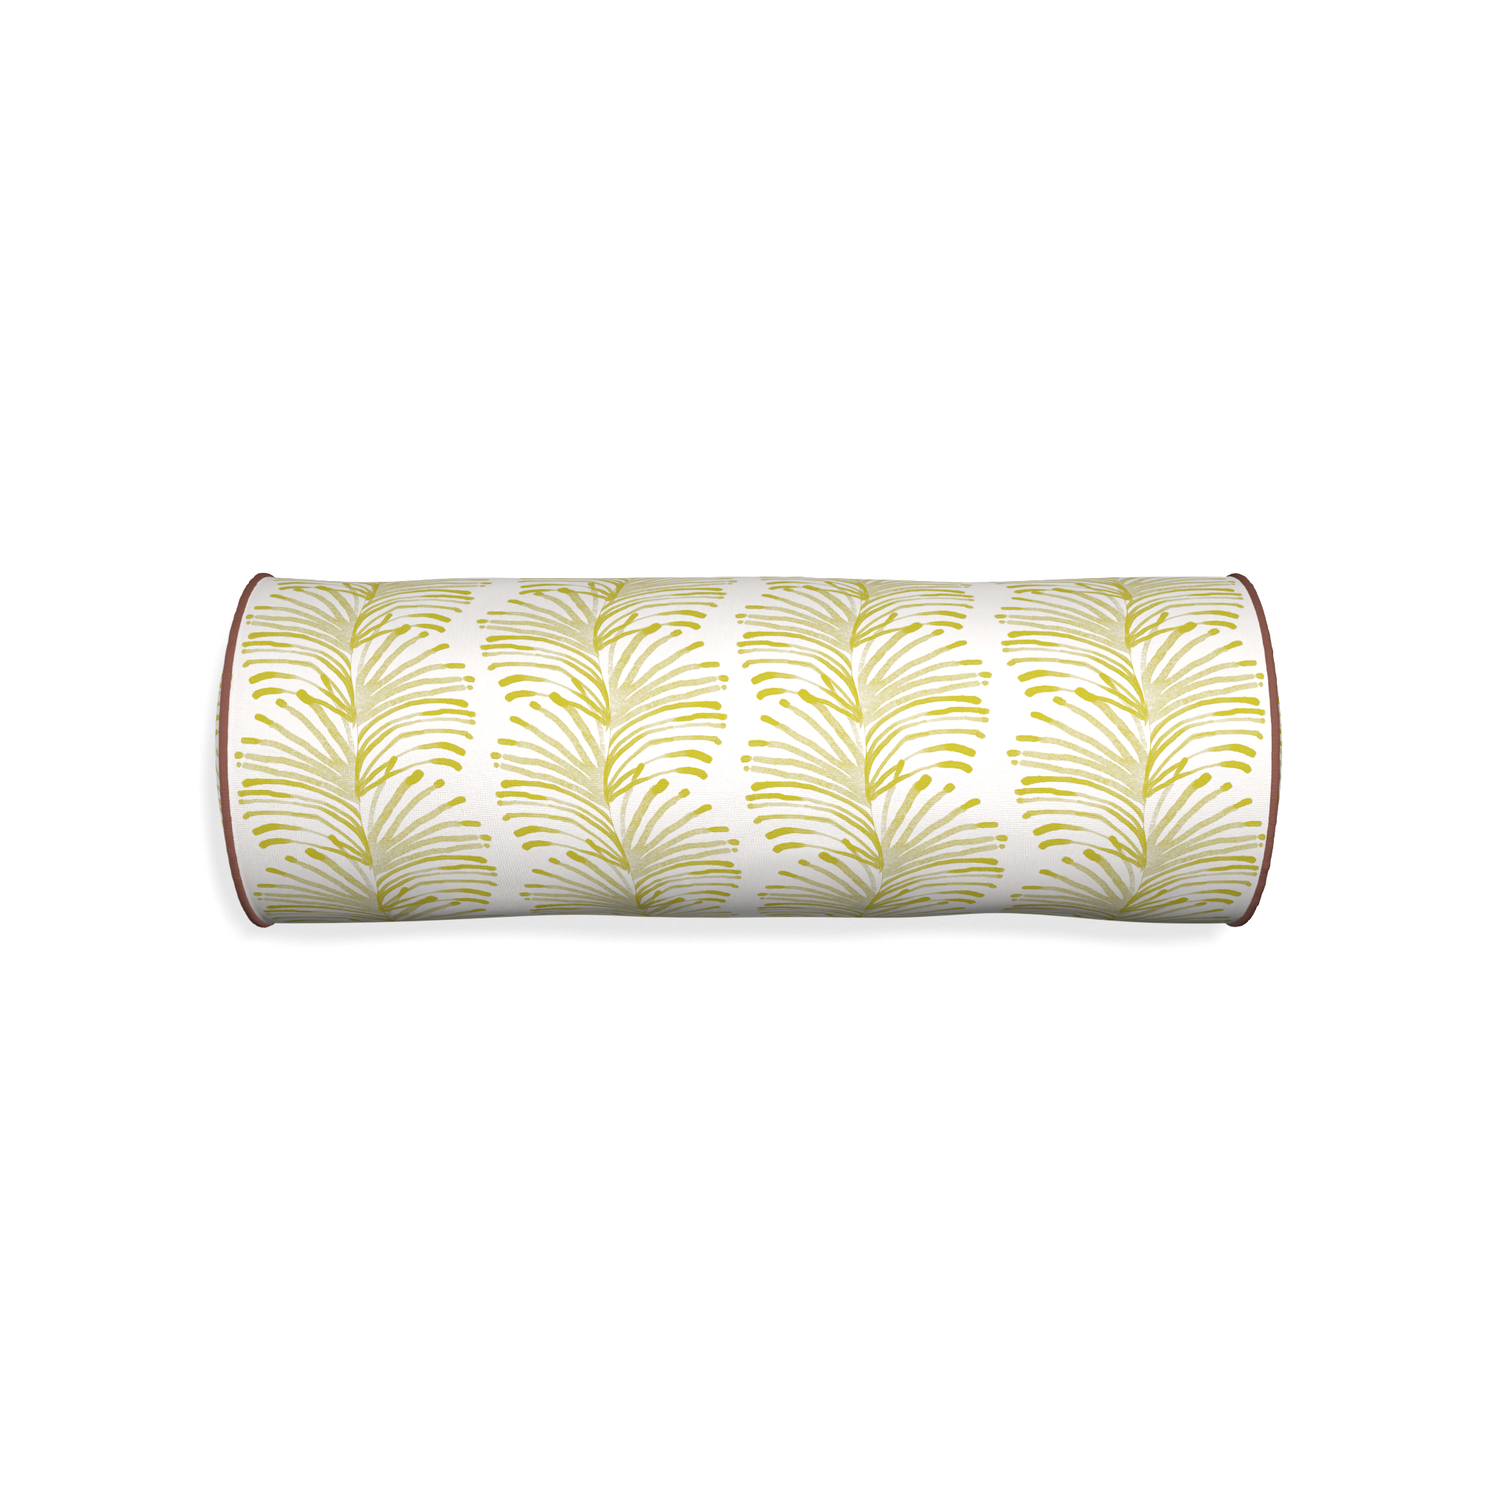 Bolster emma chartreuse custom yellow stripe chartreusepillow with w piping on white background